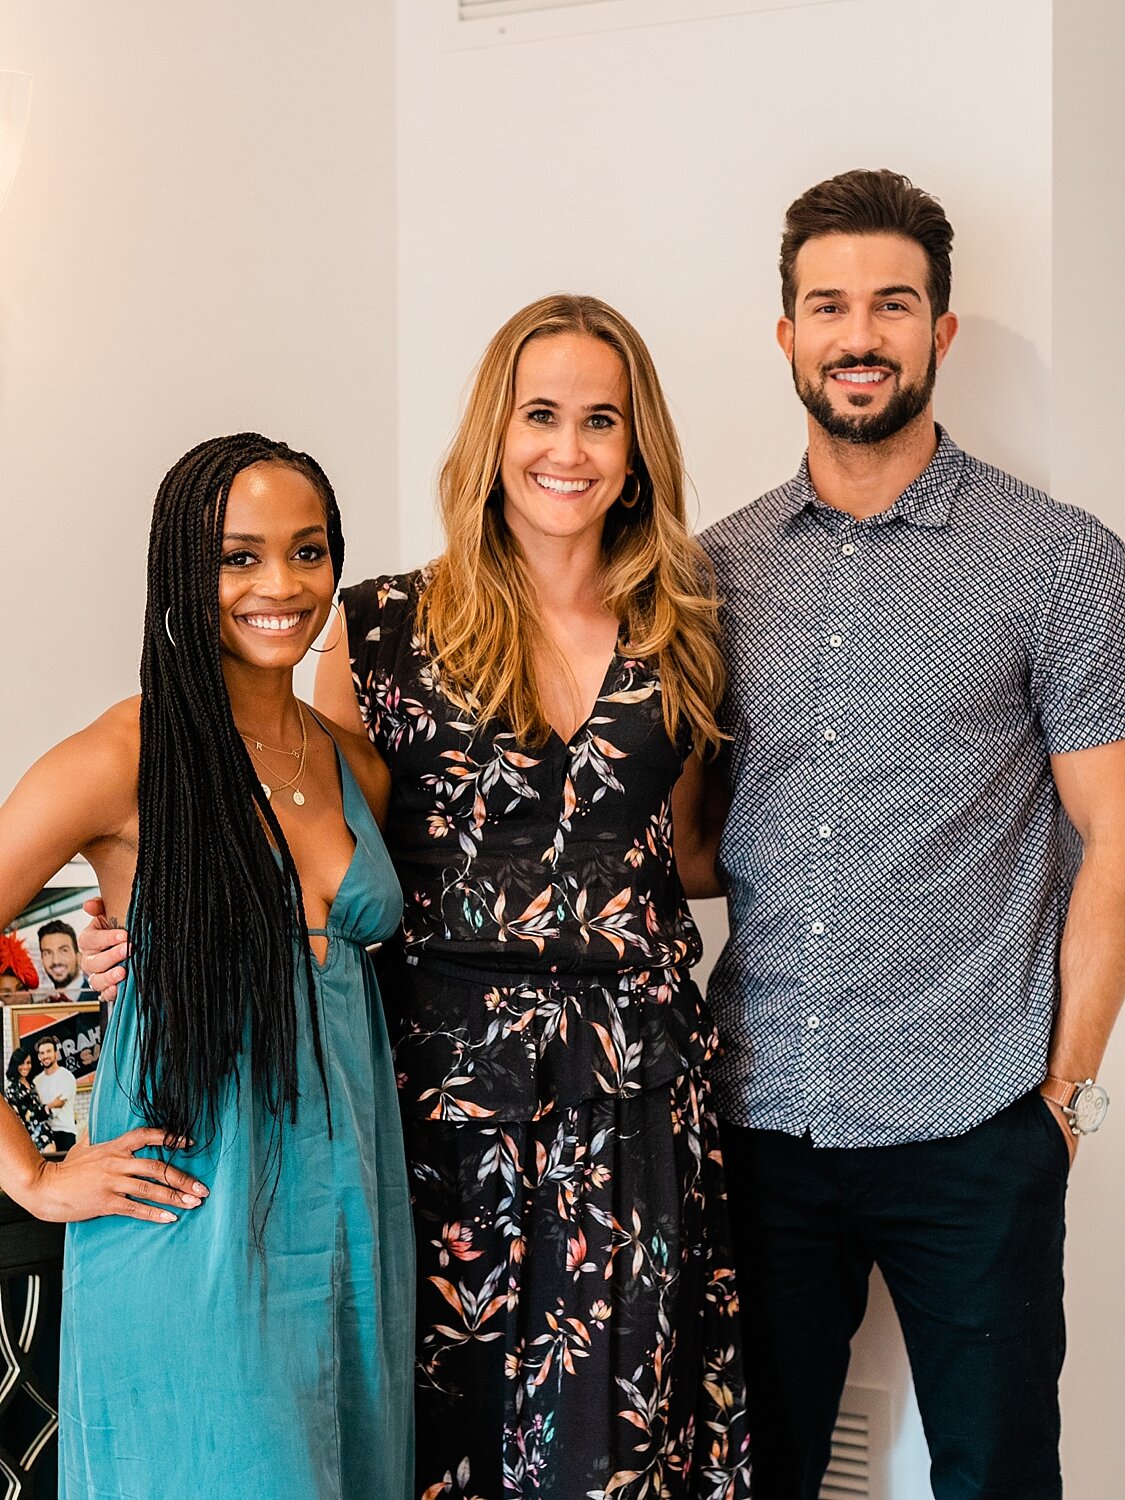 The Knot Registry event with Bachelorette Rachel Lindsay